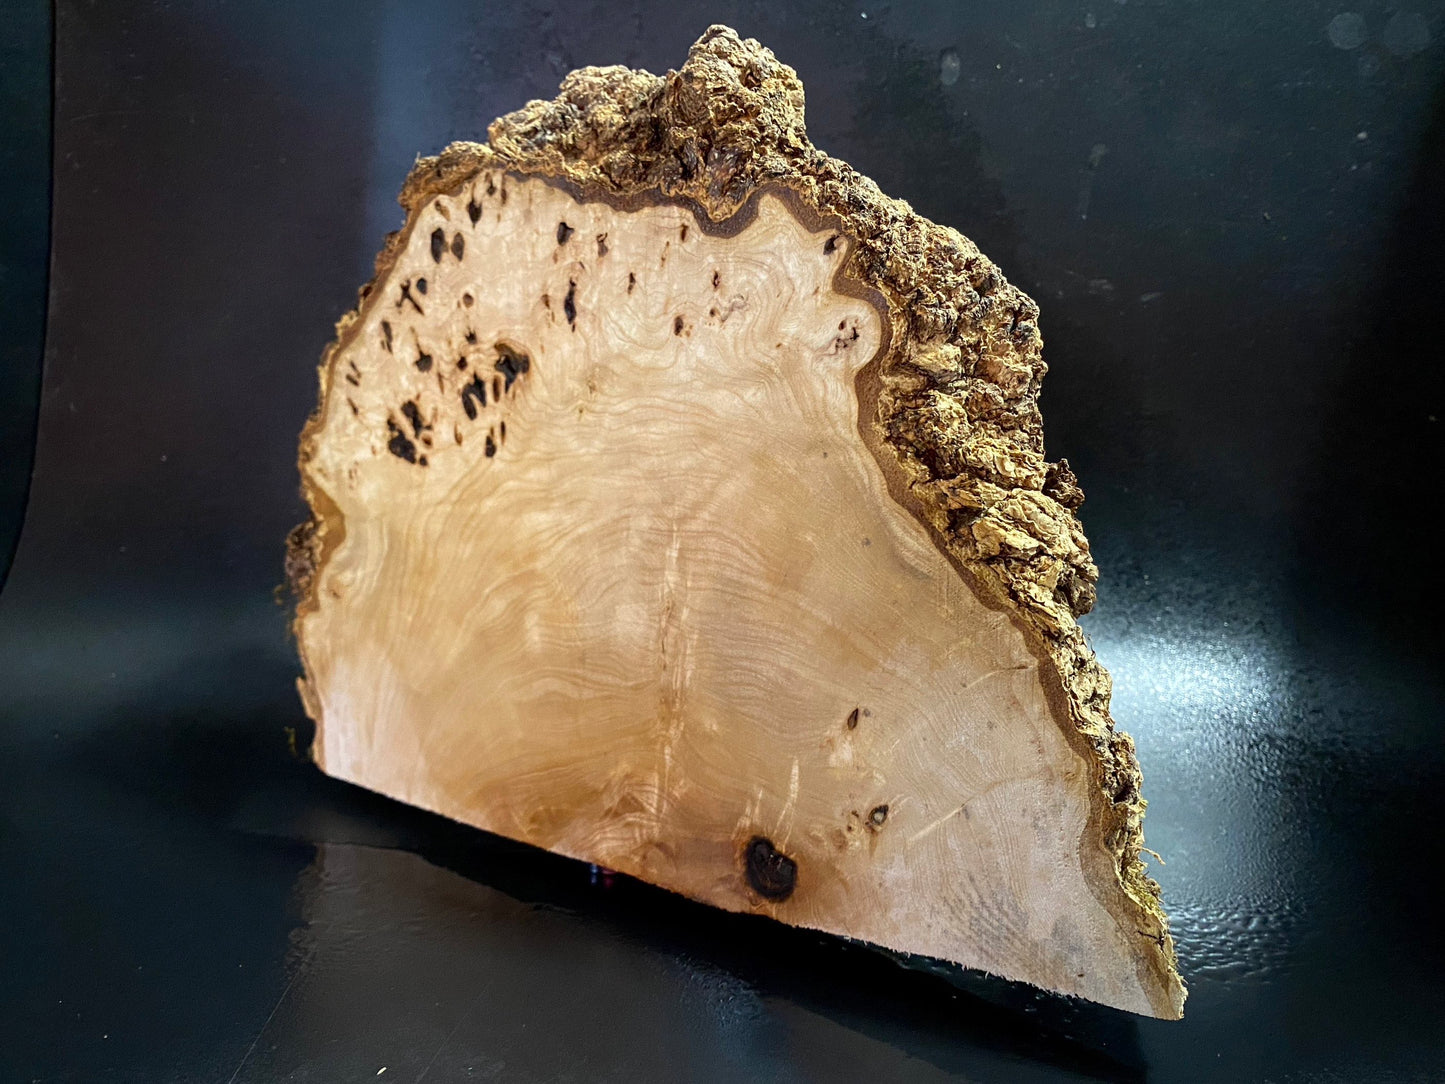 WALNUT BURL Wood Very Rare, Blank for woodworking, turning. France Stock. #W.157